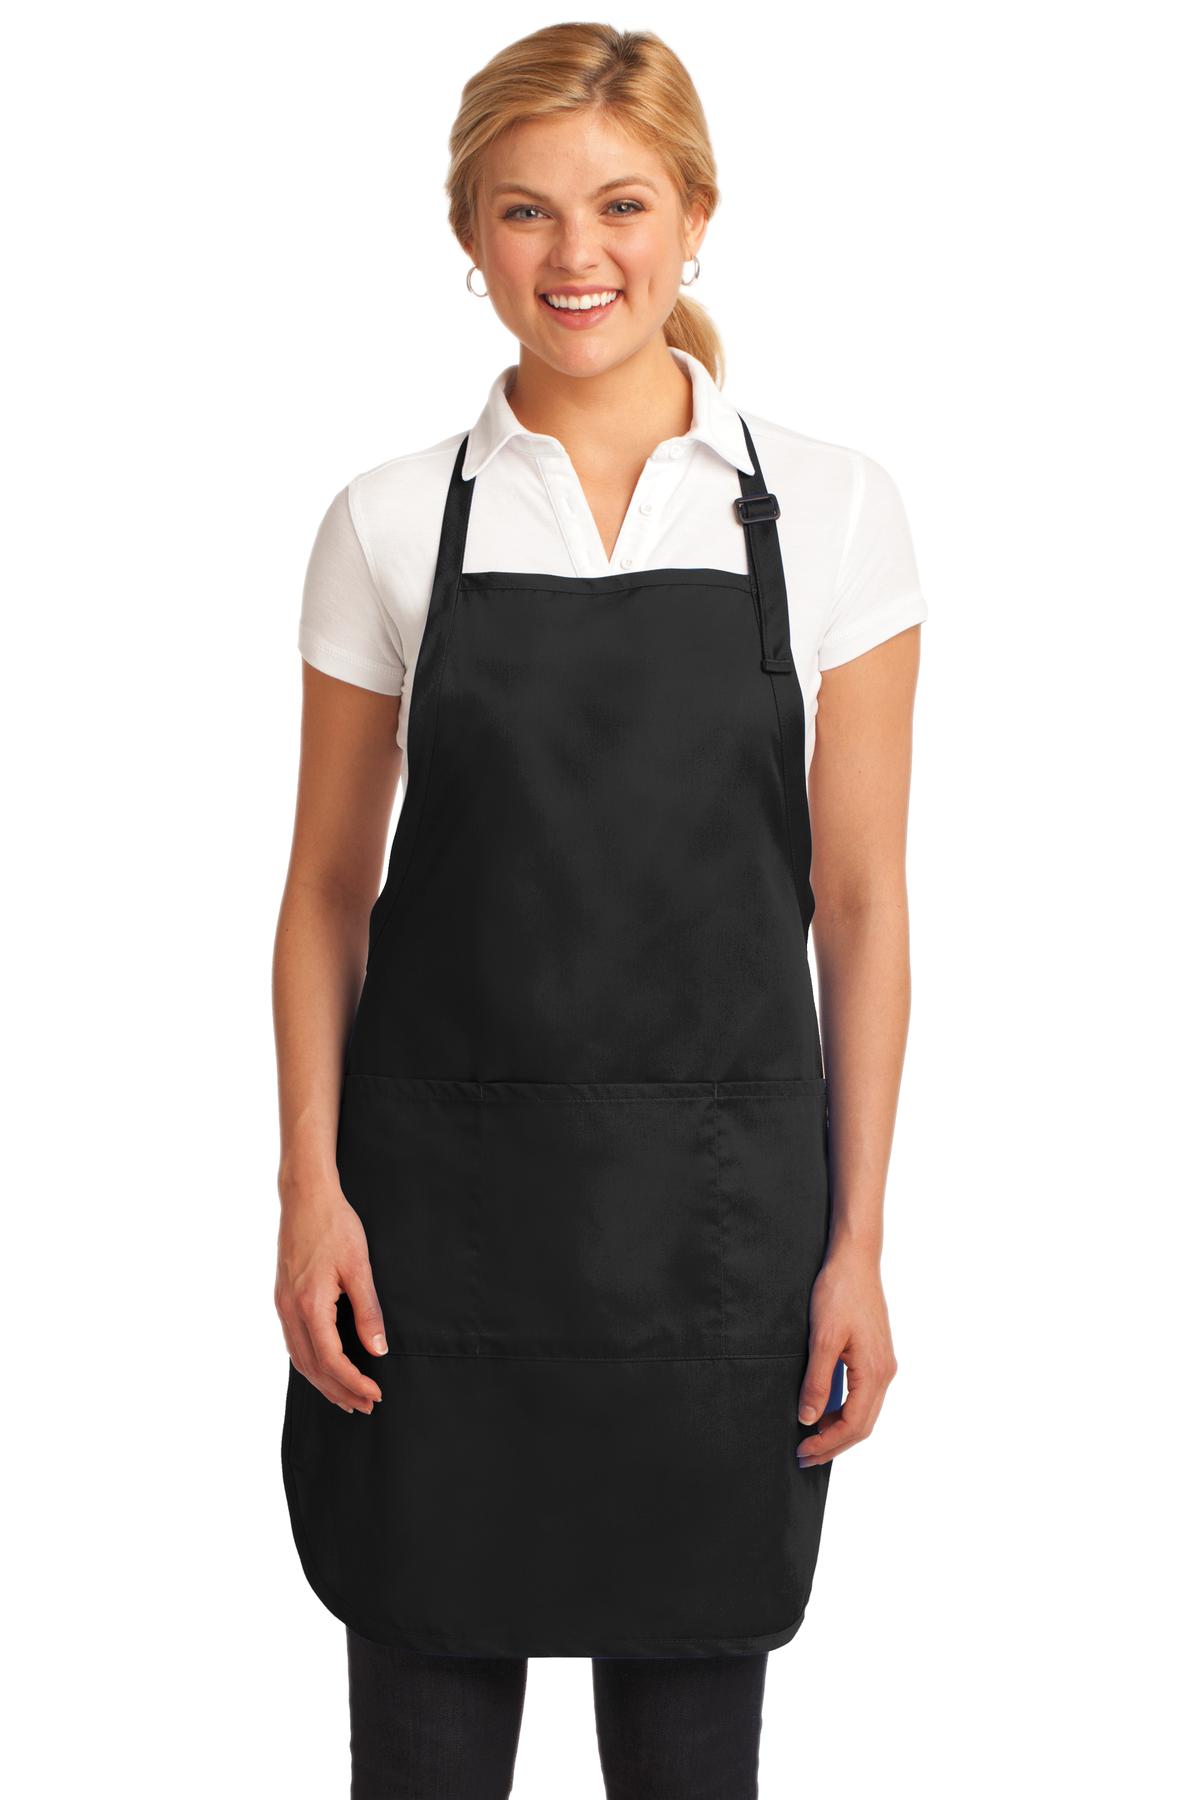 Port Authority Easy Care Full-Length Apron with Stain...